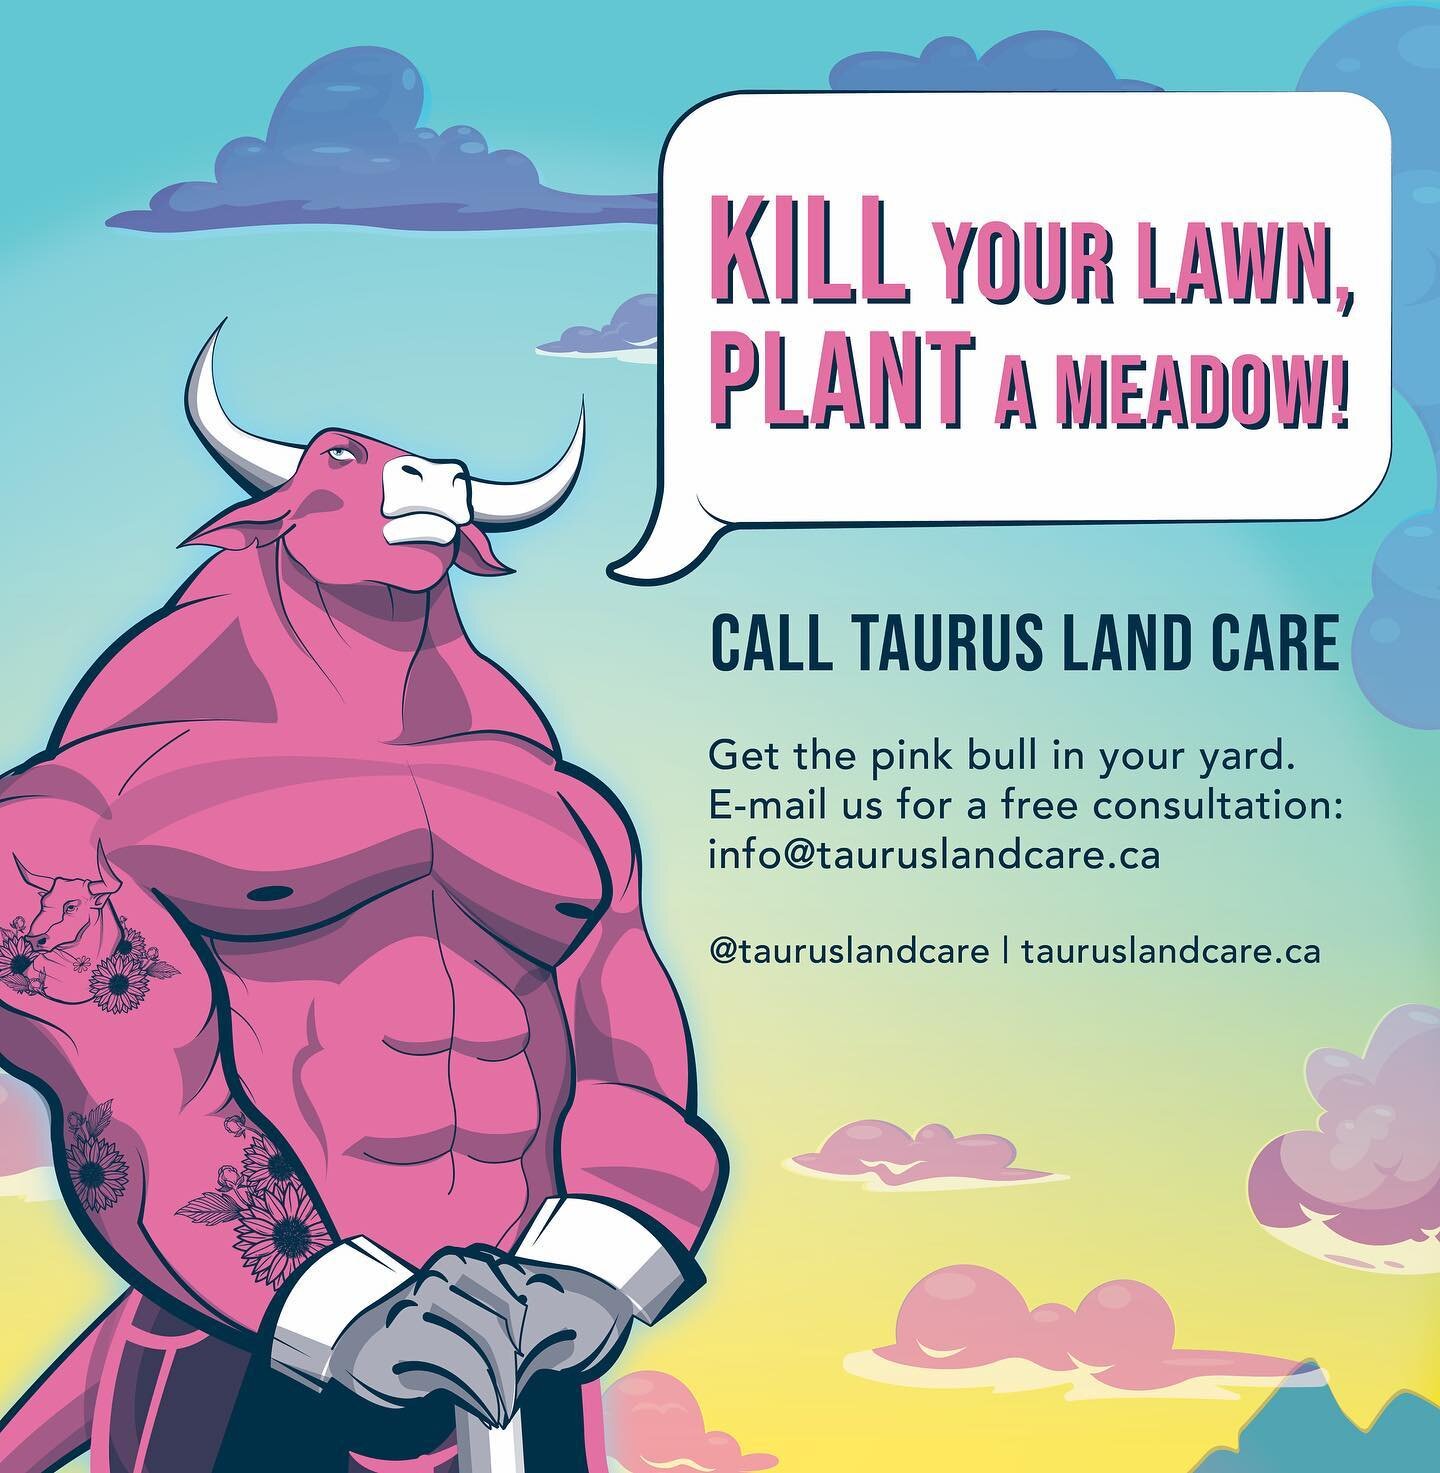 The team at Taurus Land Care is here to help you kill your lawn and grow a native plant meadow. Meadows are lower maintenance, provide habitat for pollinators and songbirds, and are more resilient to a changing climate. From everything from a complet